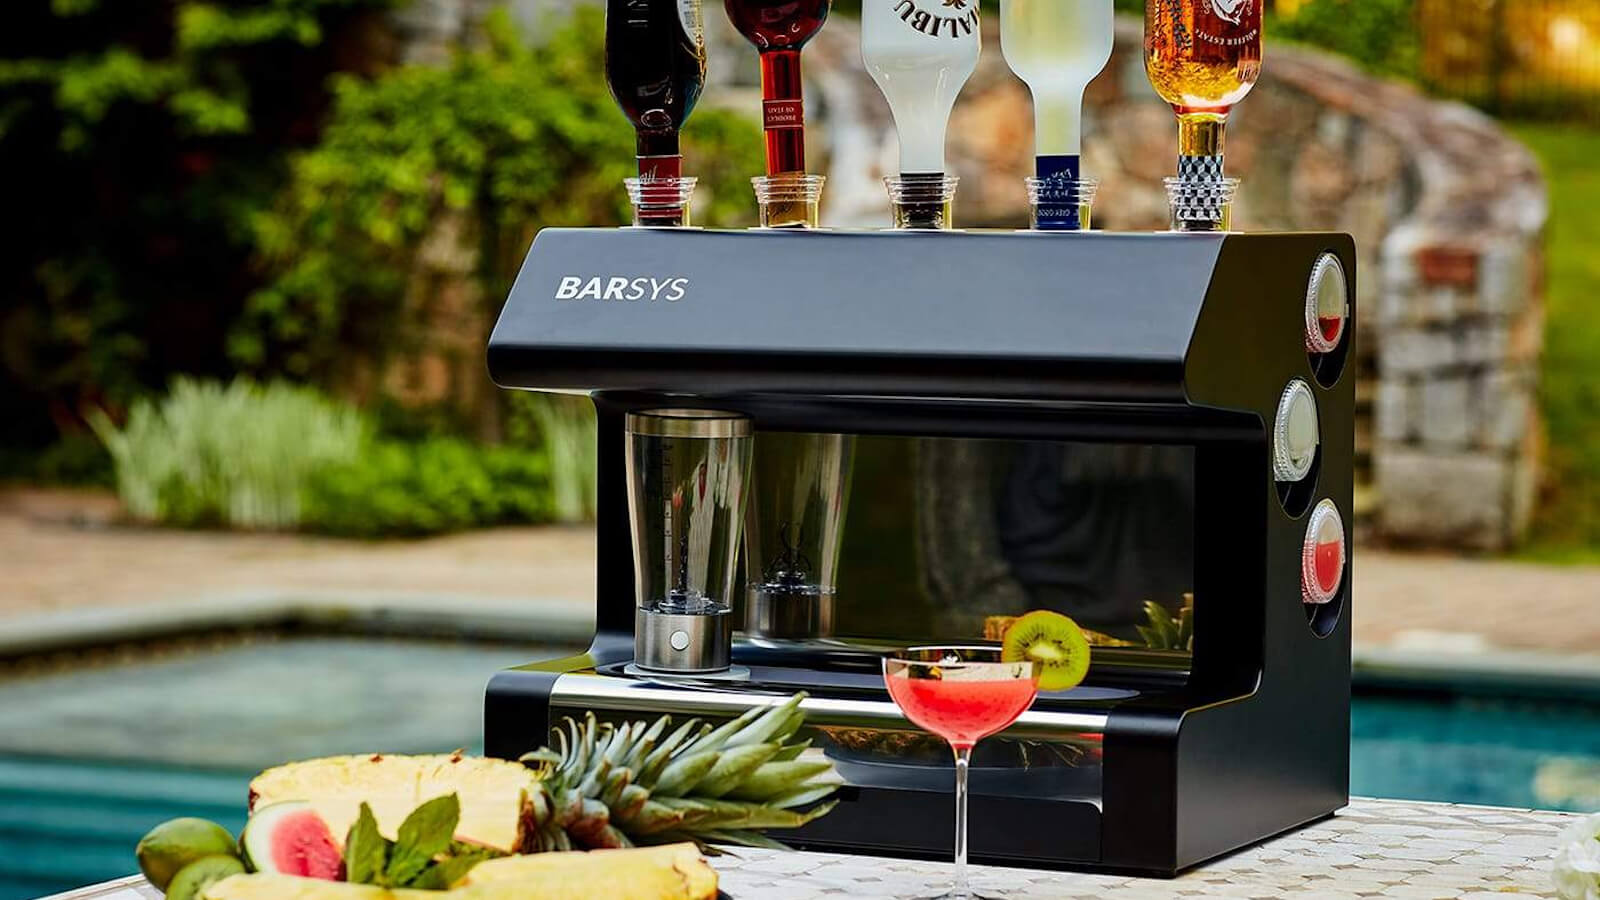 https://thegadgetflow.com/wp-content/uploads/2020/06/Barsys-2-0-Home-Automated-Cocktail-Maker-003.jpg